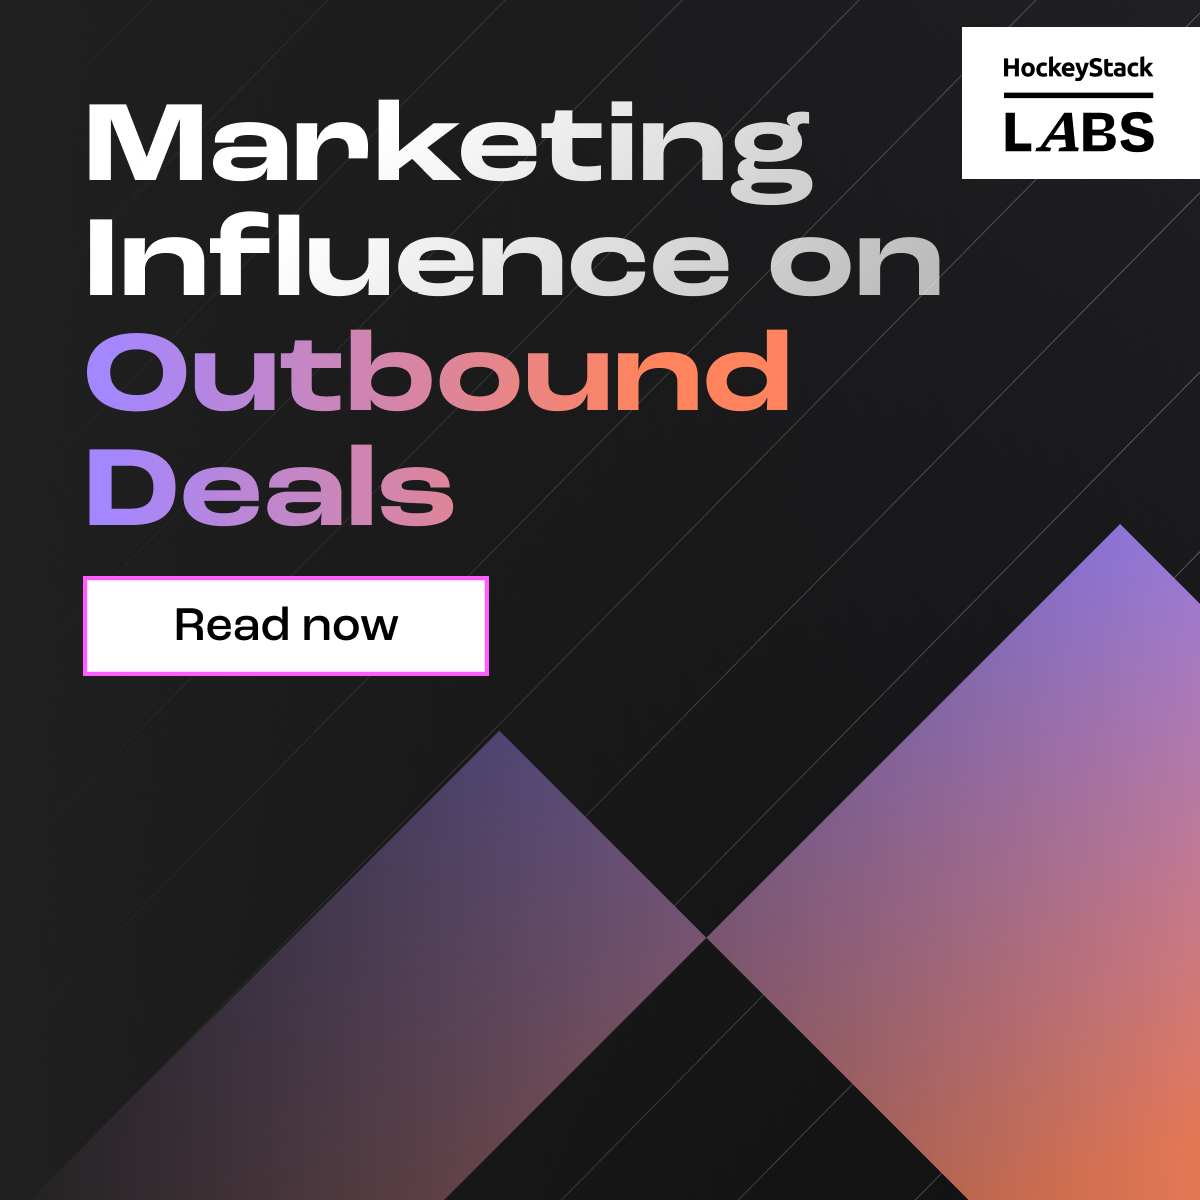 Marketing Influence on Outbound Deals